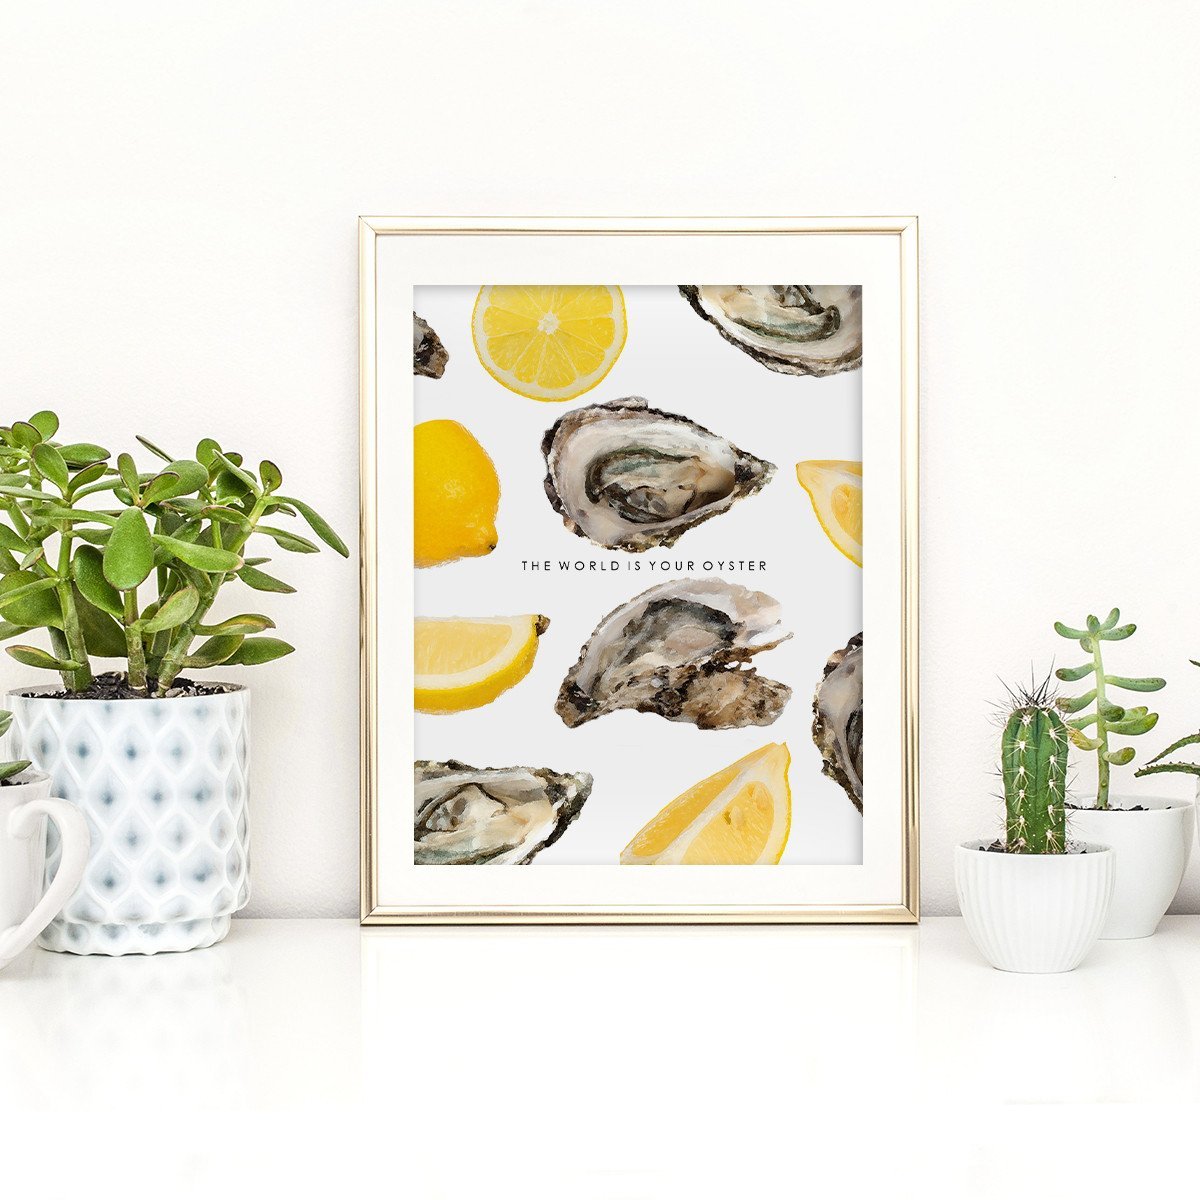 Gallery Prints 12x16 The World is Your Oyster Print Katie Kime